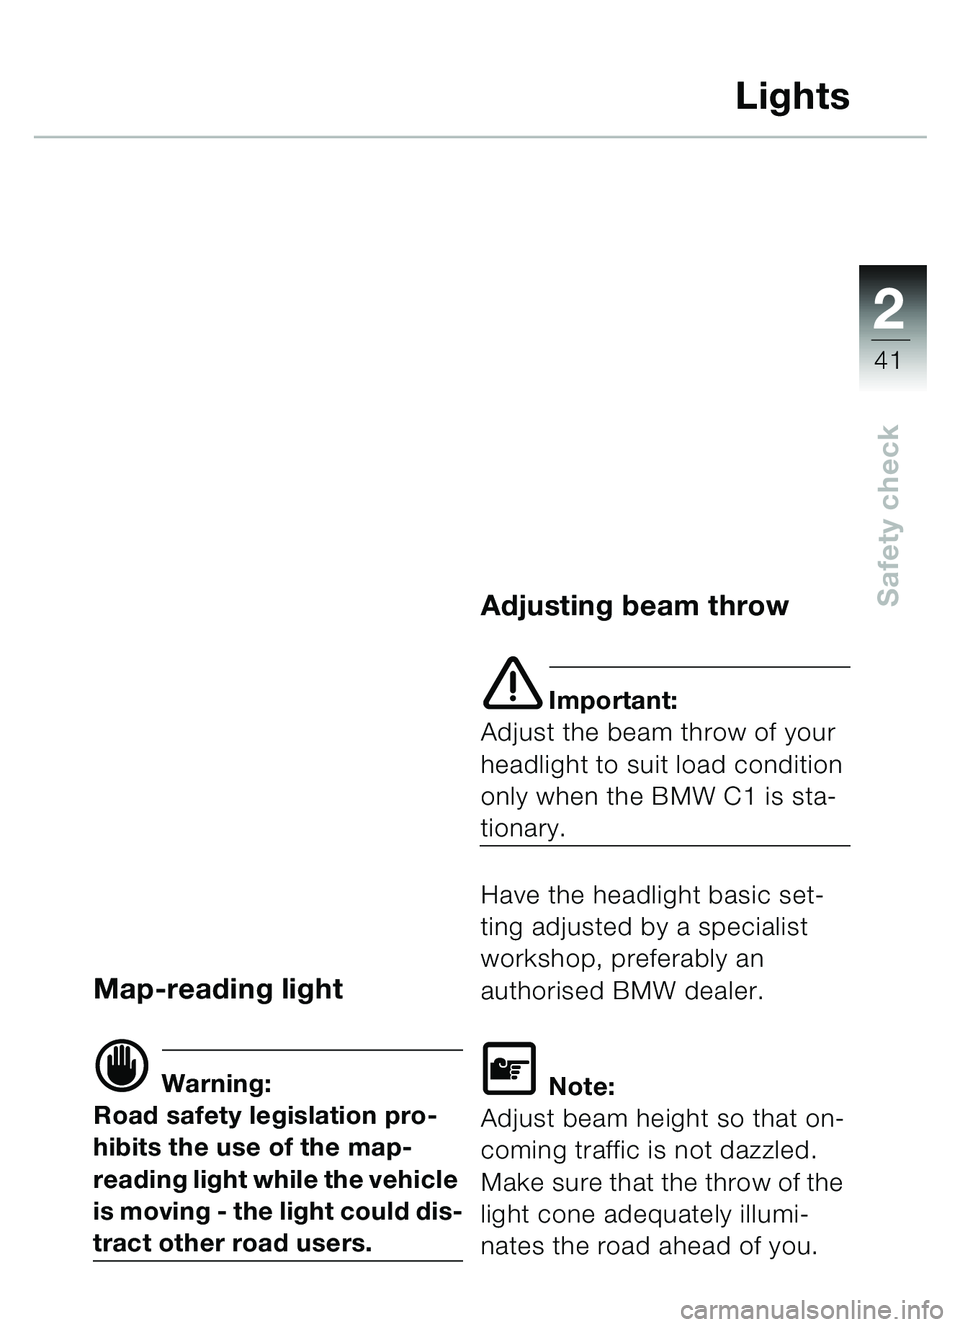 BMW MOTORRAD C1 2000  Riders Manual (in English) 2
41
Safety check
Lights
Map-reading light
d Warning:
Road safety legislation pro-
hibits the use of the map-
reading light while the vehicle 
is moving - the light could dis-
tract other road users.
